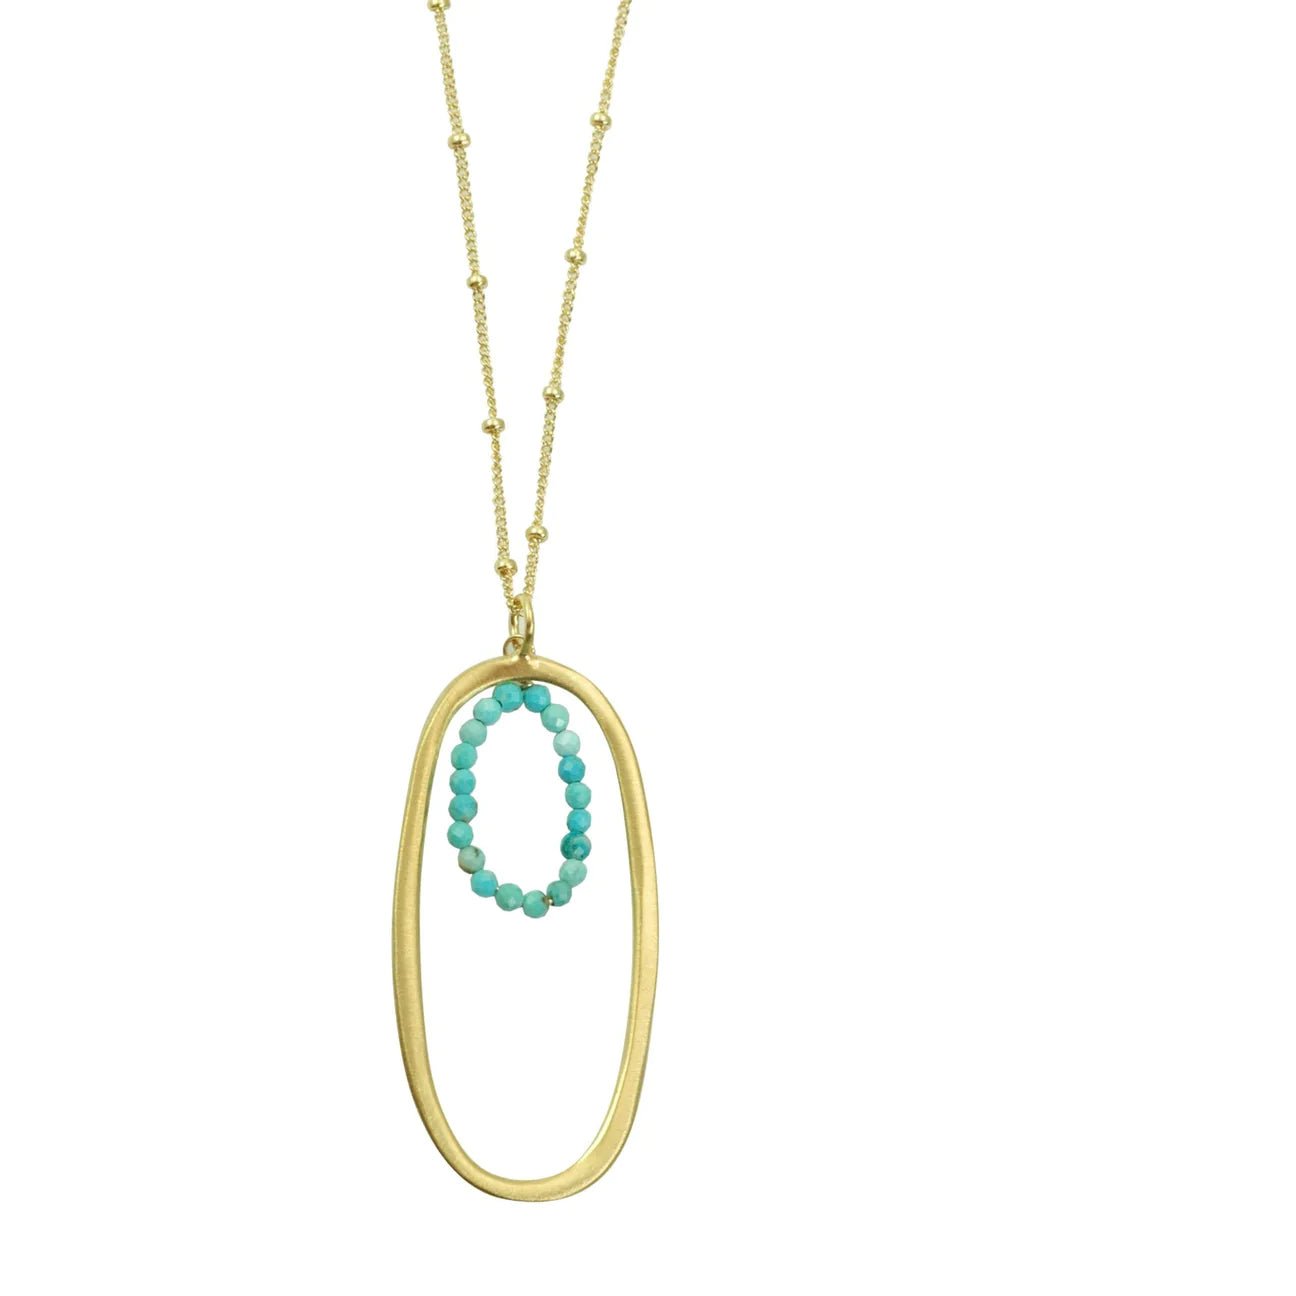 medium oval w. turquoise beads necklace - The Riviera Towel Company